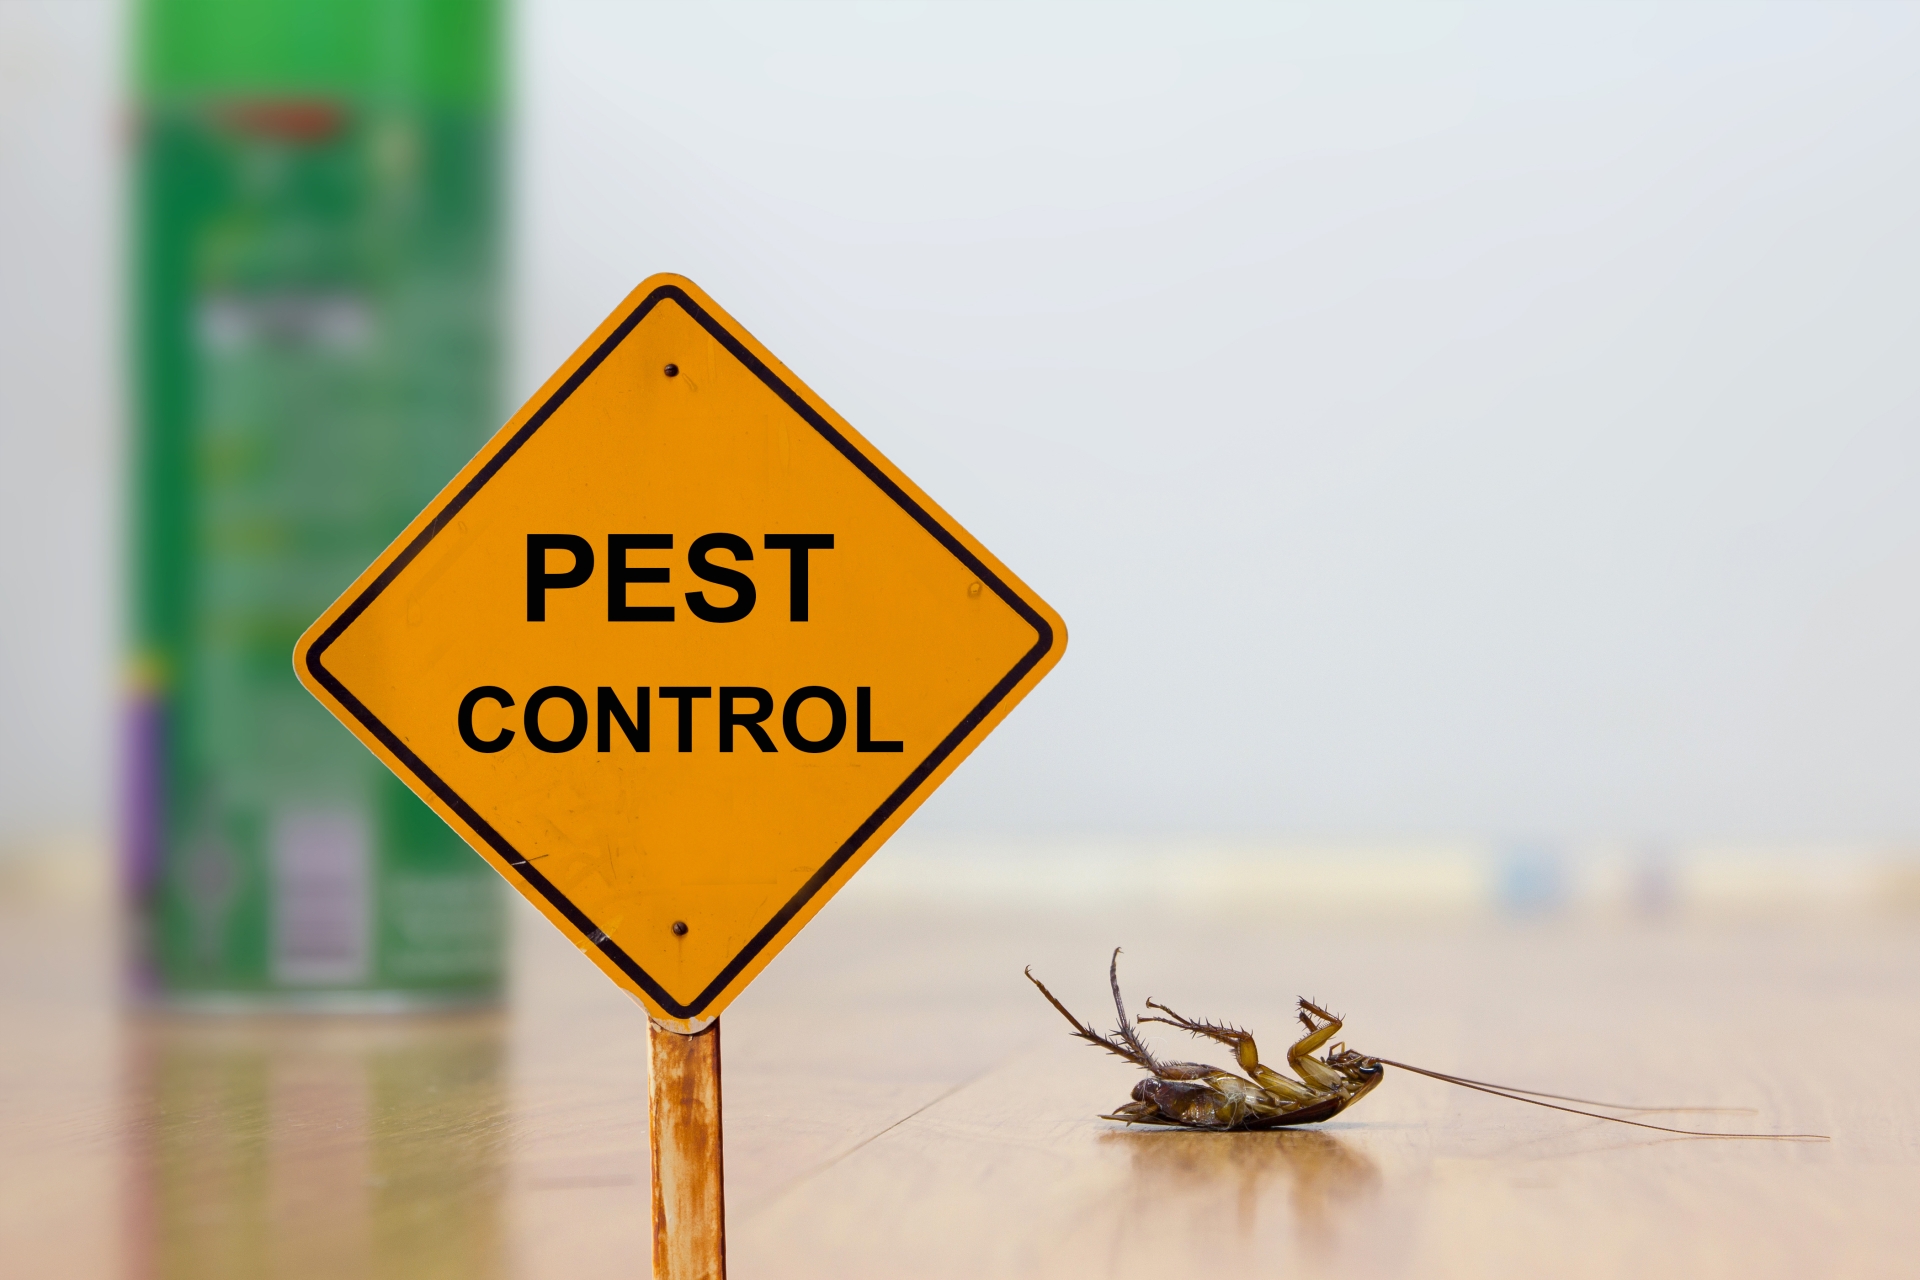 24 Hour Pest Control, Pest Control in Moorgate, Liverpool Street, EC2. Call Now 020 8166 9746